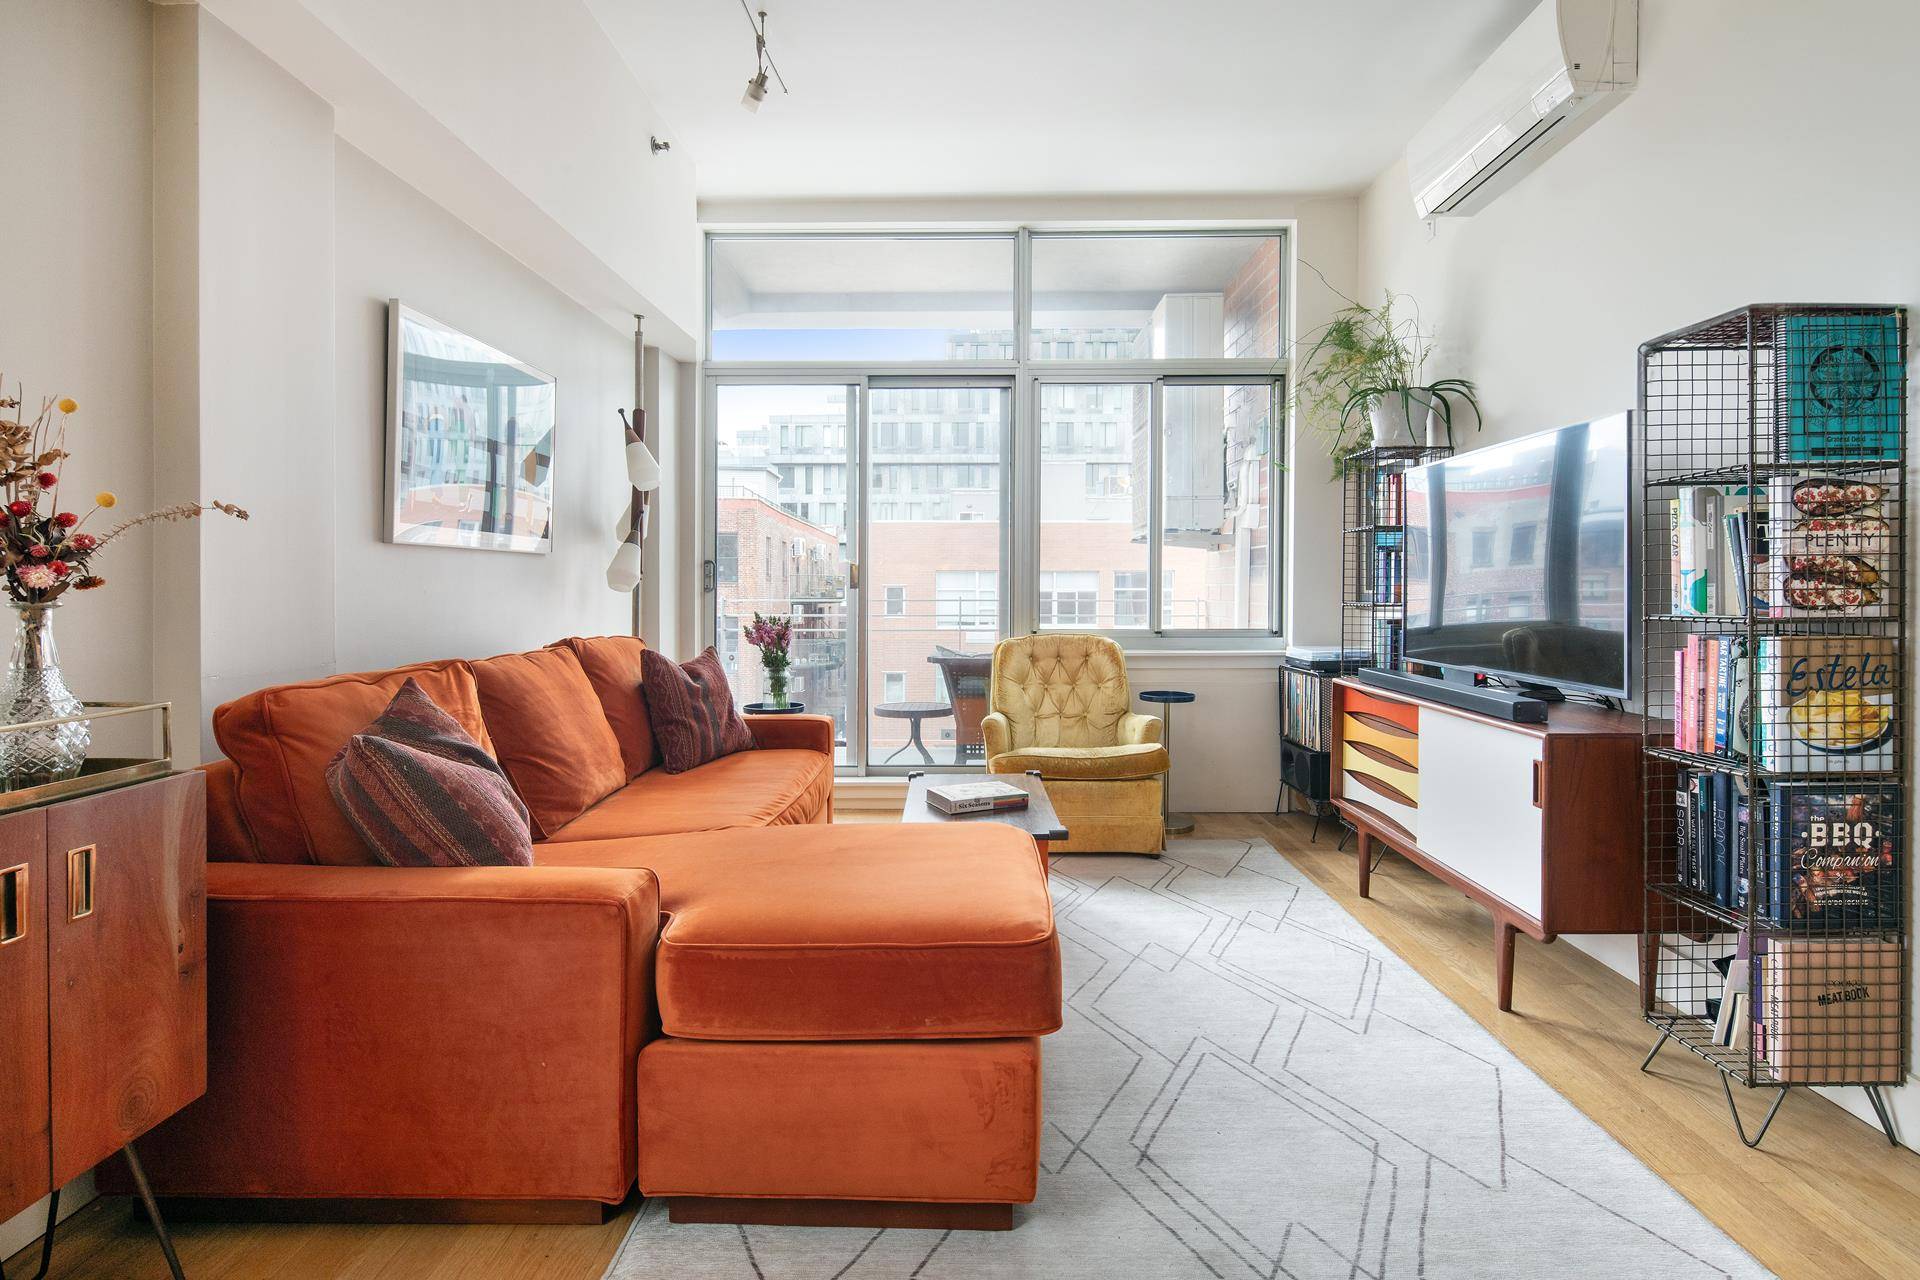 Nestled in the heart of prime Williamsburg, Brooklyn, this condominium residence seamlessly blends style and comfort.